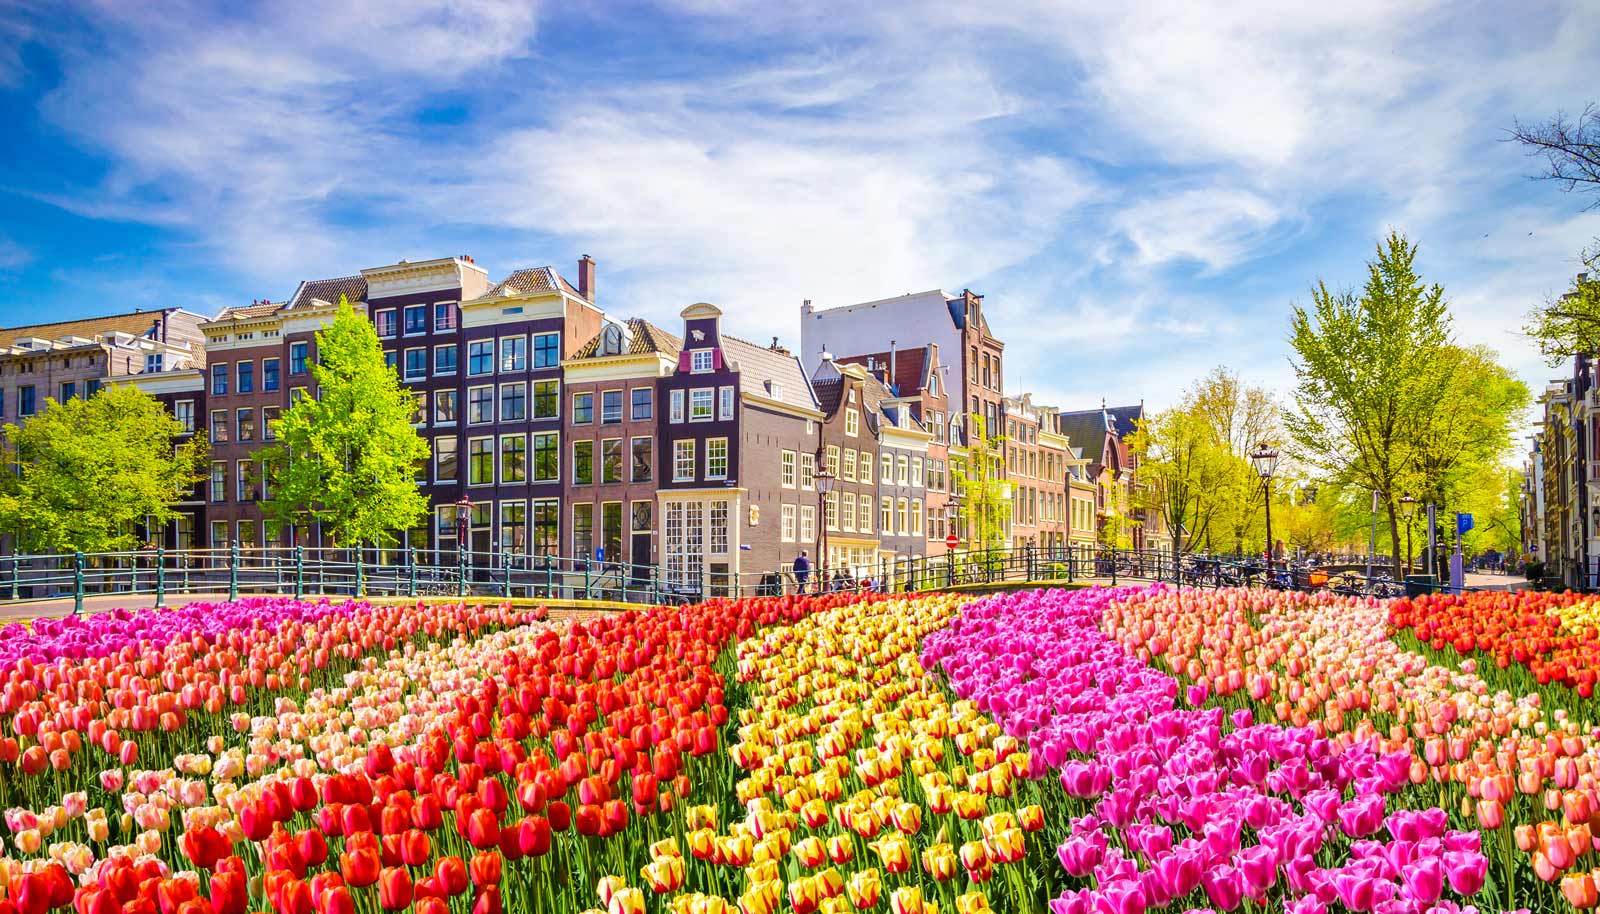 Where to Stay in Amsterdam - Best Hotels & Neighbourhoods